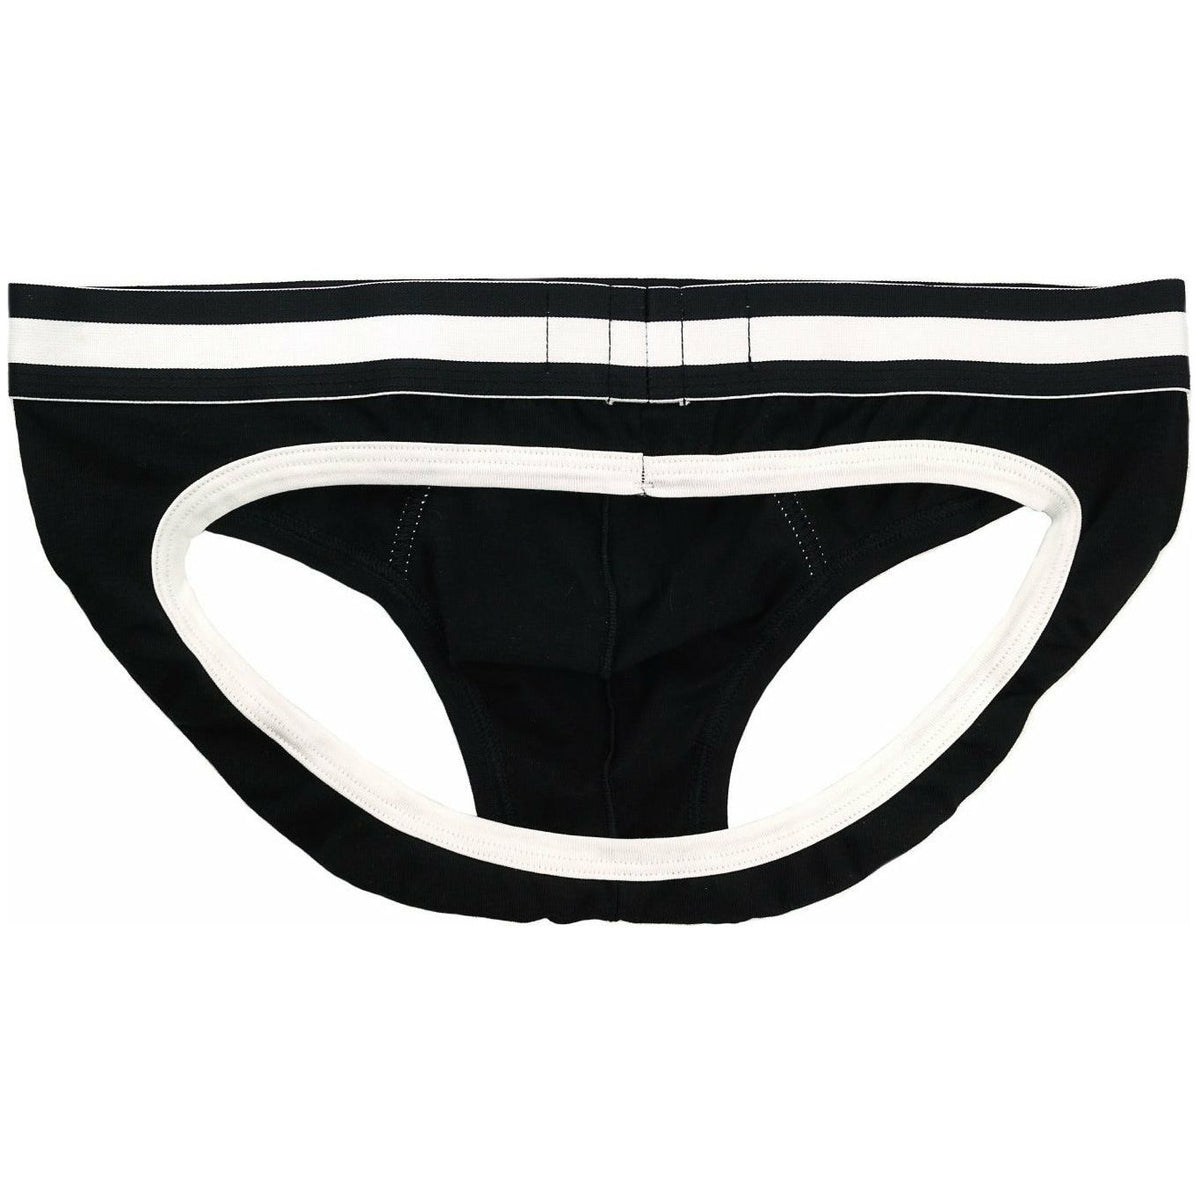 Prowler Classic Backless Brief – Black/White - Small